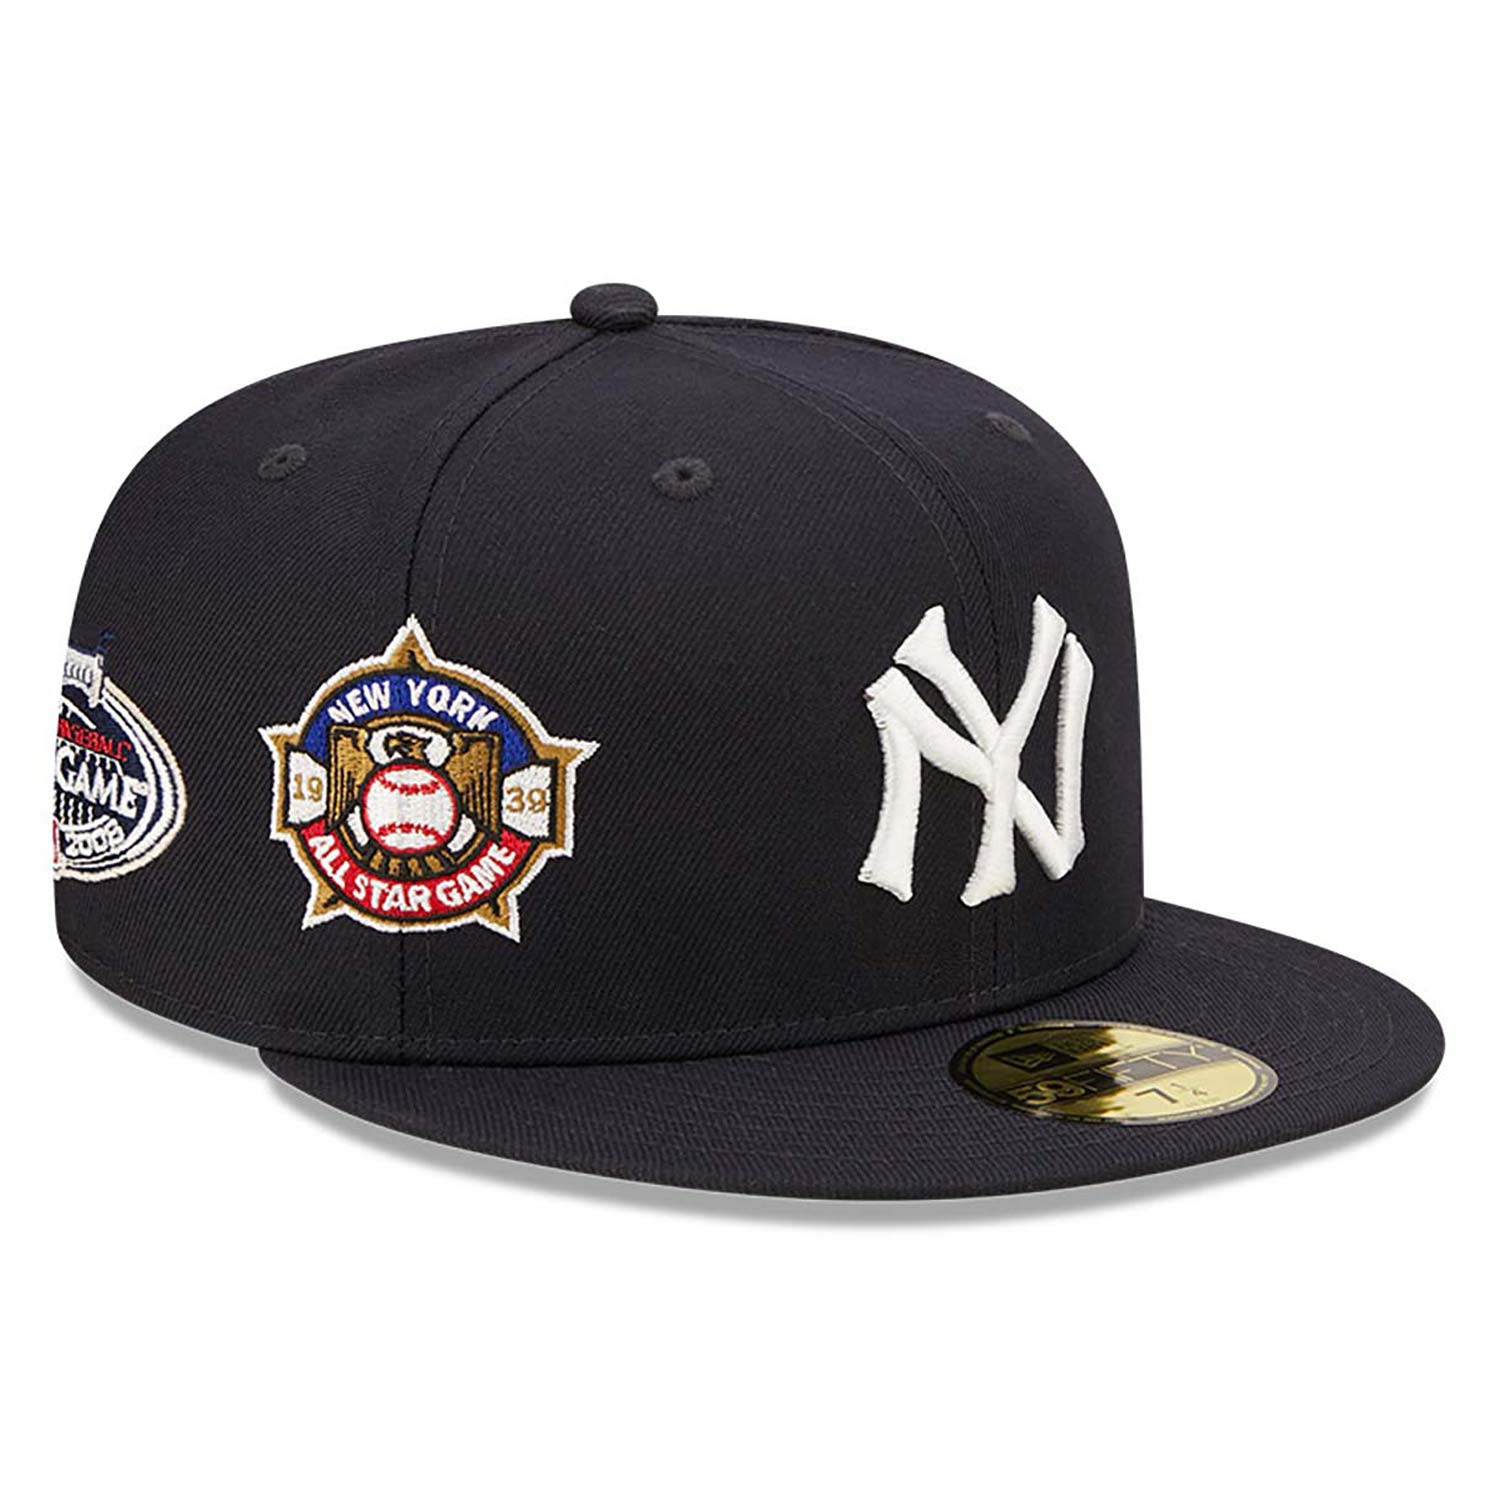 New York Yankees Cooperstown Multi Patch Black 59FIFTY Fitted Cap